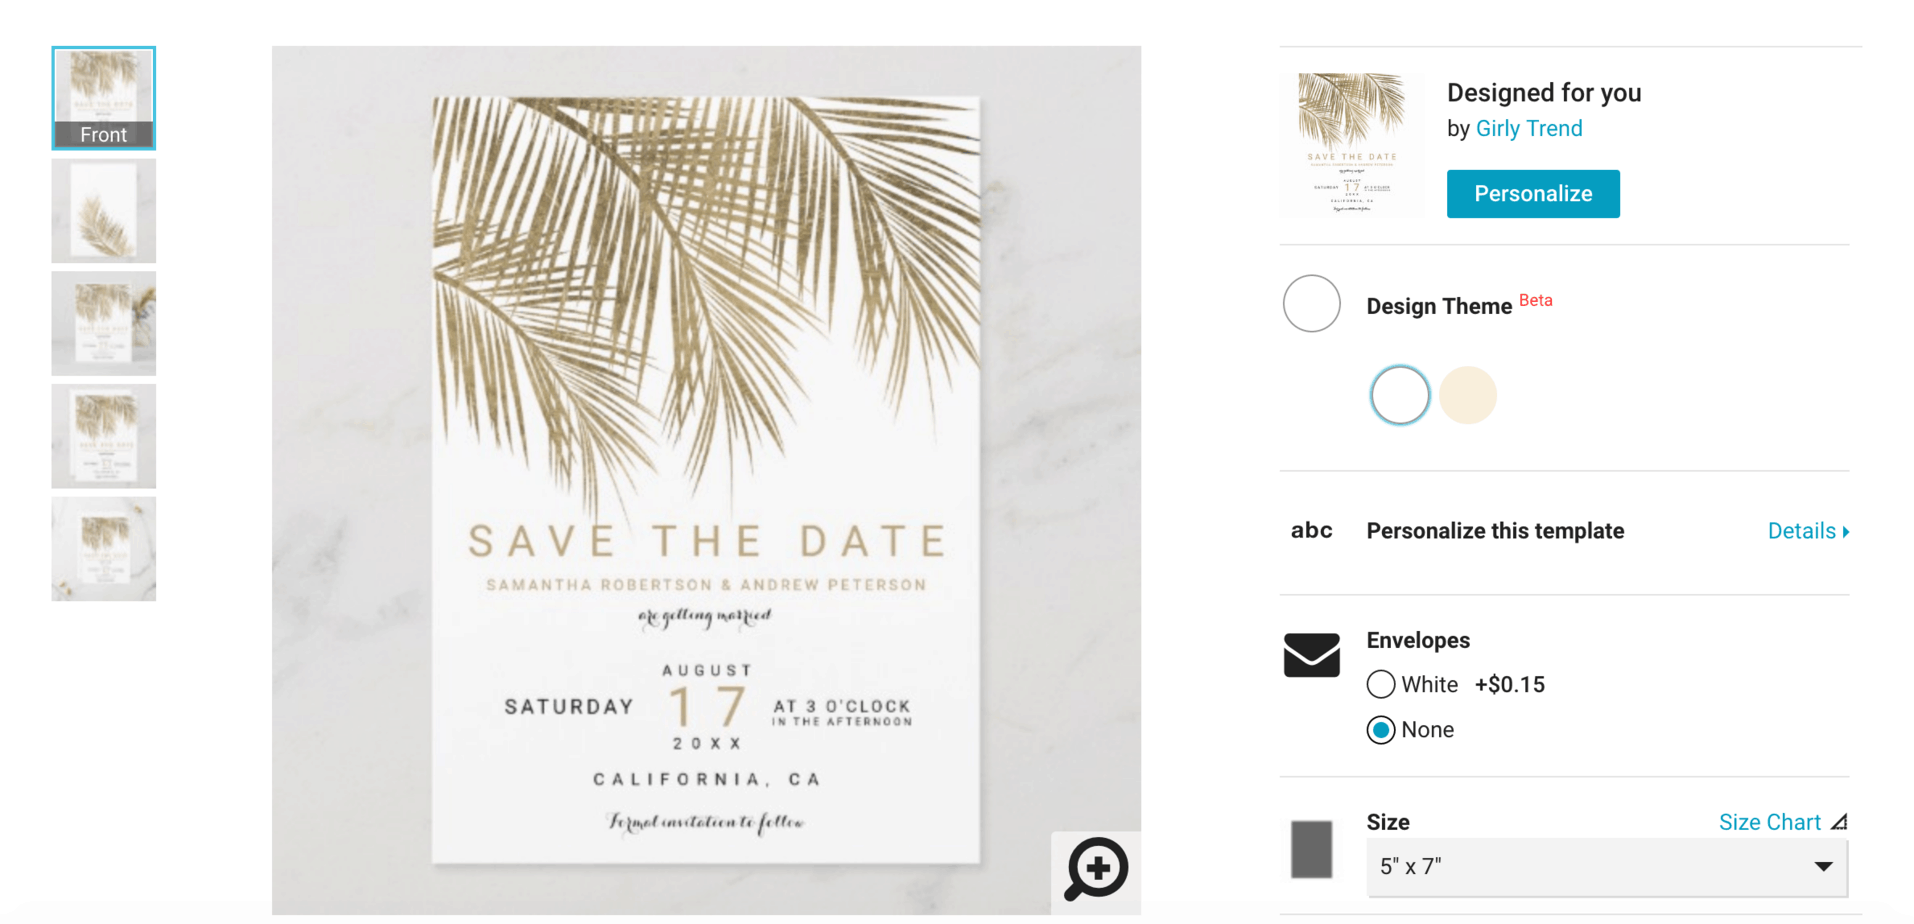 This design theme option shows the white background version of the save the date